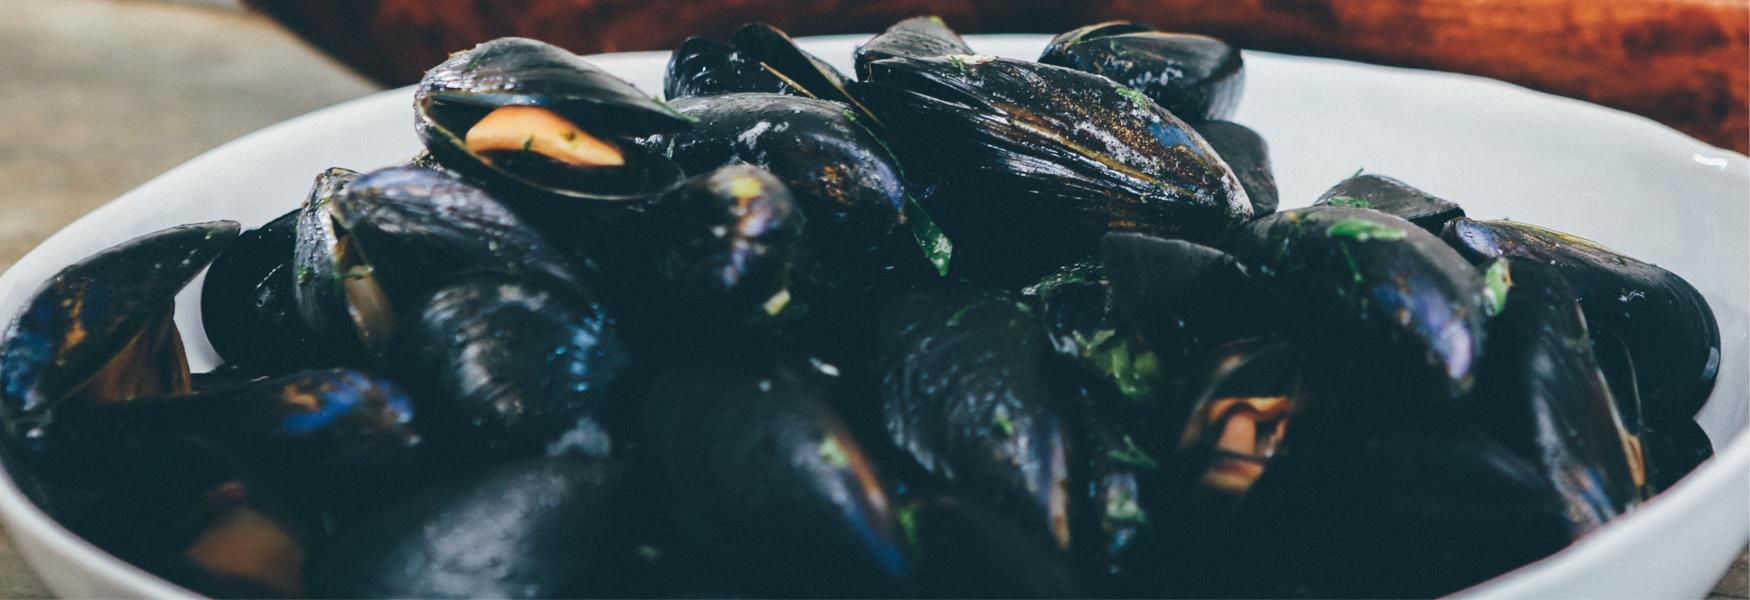 Mussels are grown just offshore